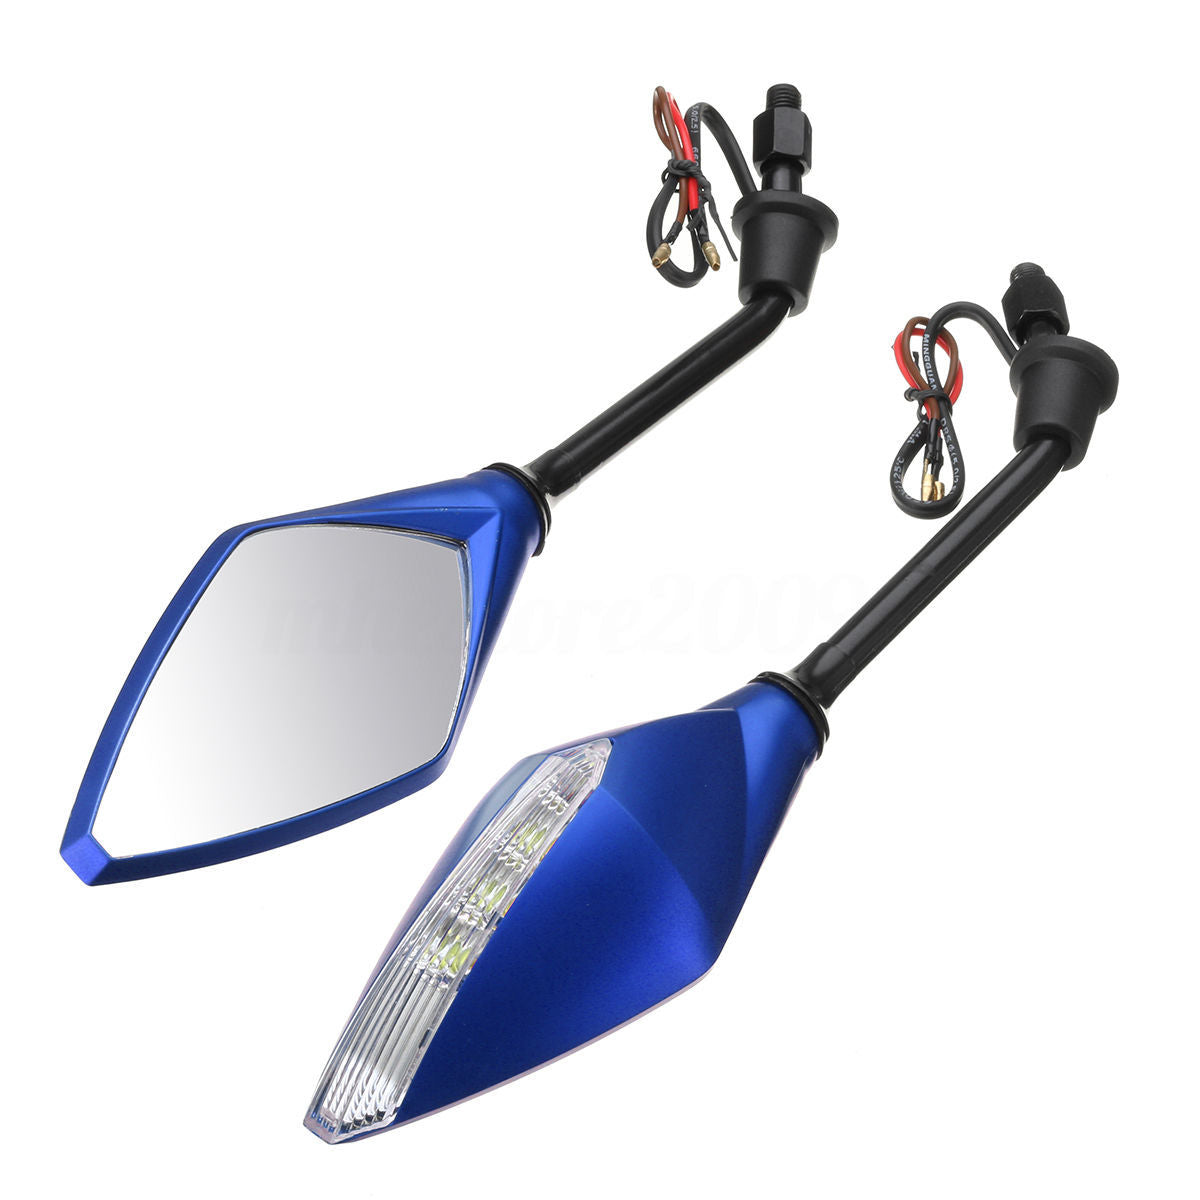 Rearview mirror for motorcycle